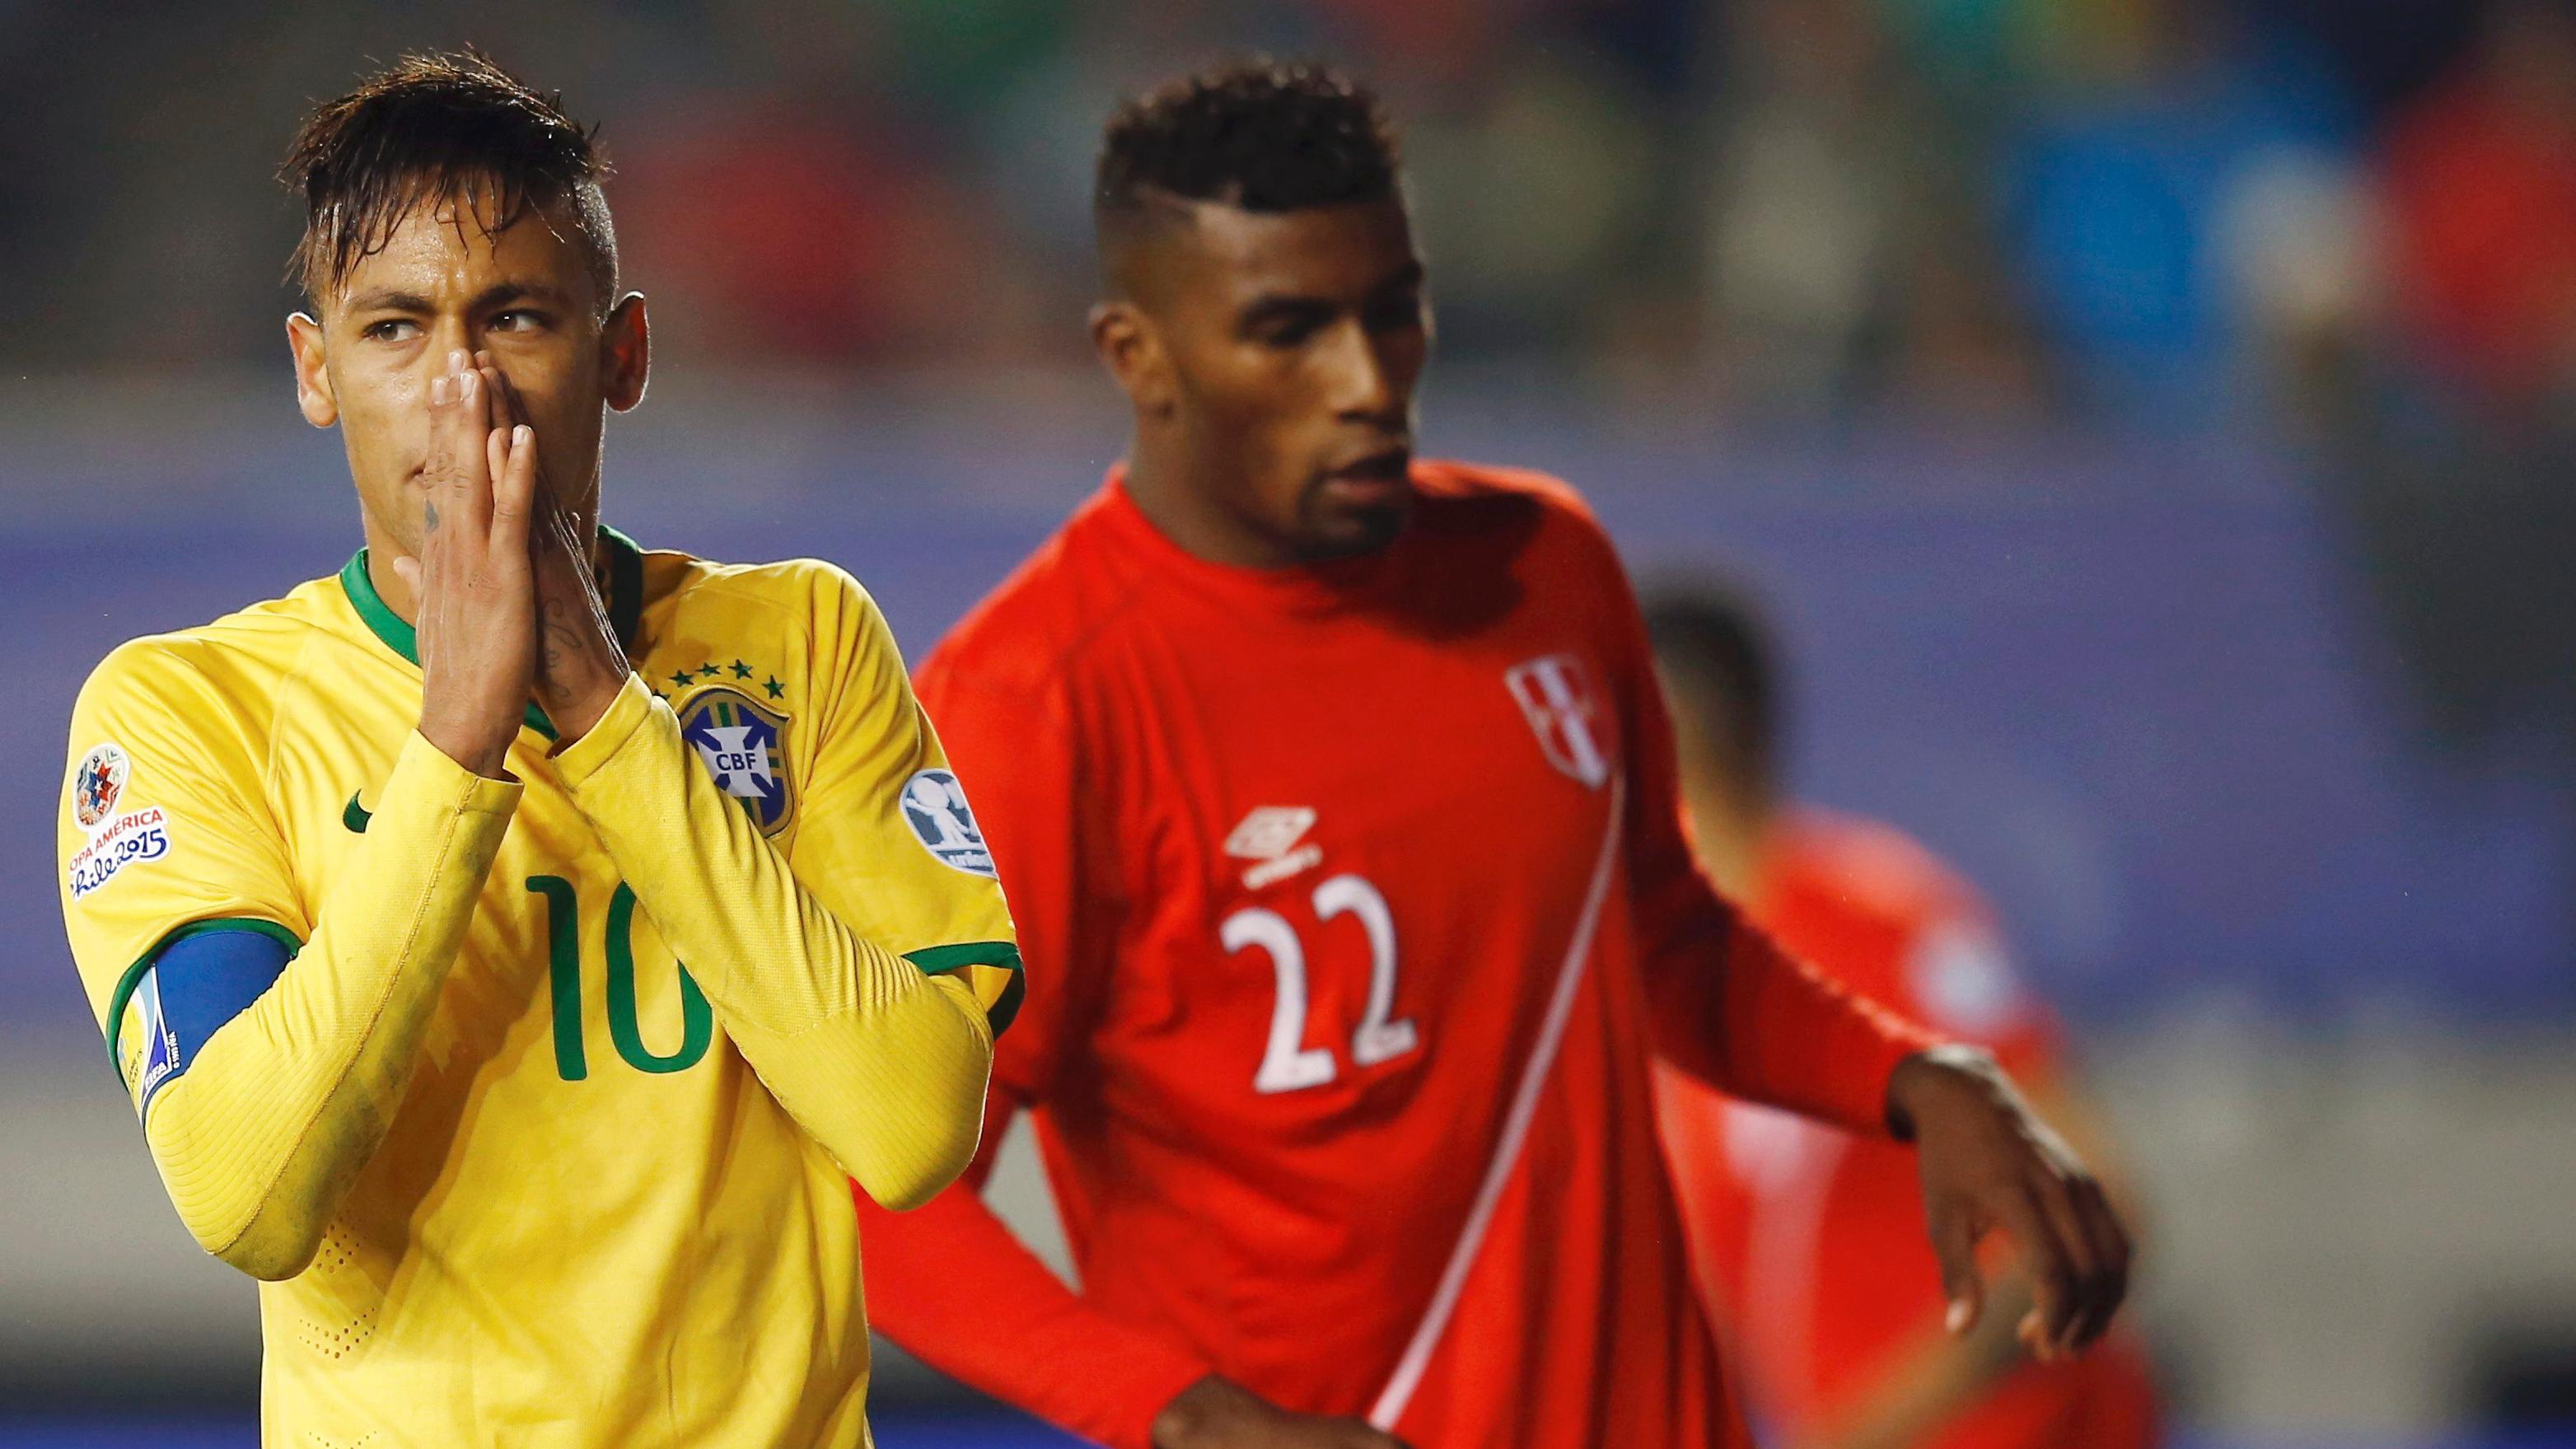 Brazil's Neymar (10) reacts next to Peru's Carlos Ascues during their first round Copa America 2015 soccer match at Estadio Municipal Bicentenario German Becker in Temuco, Chile, June 14, 2015